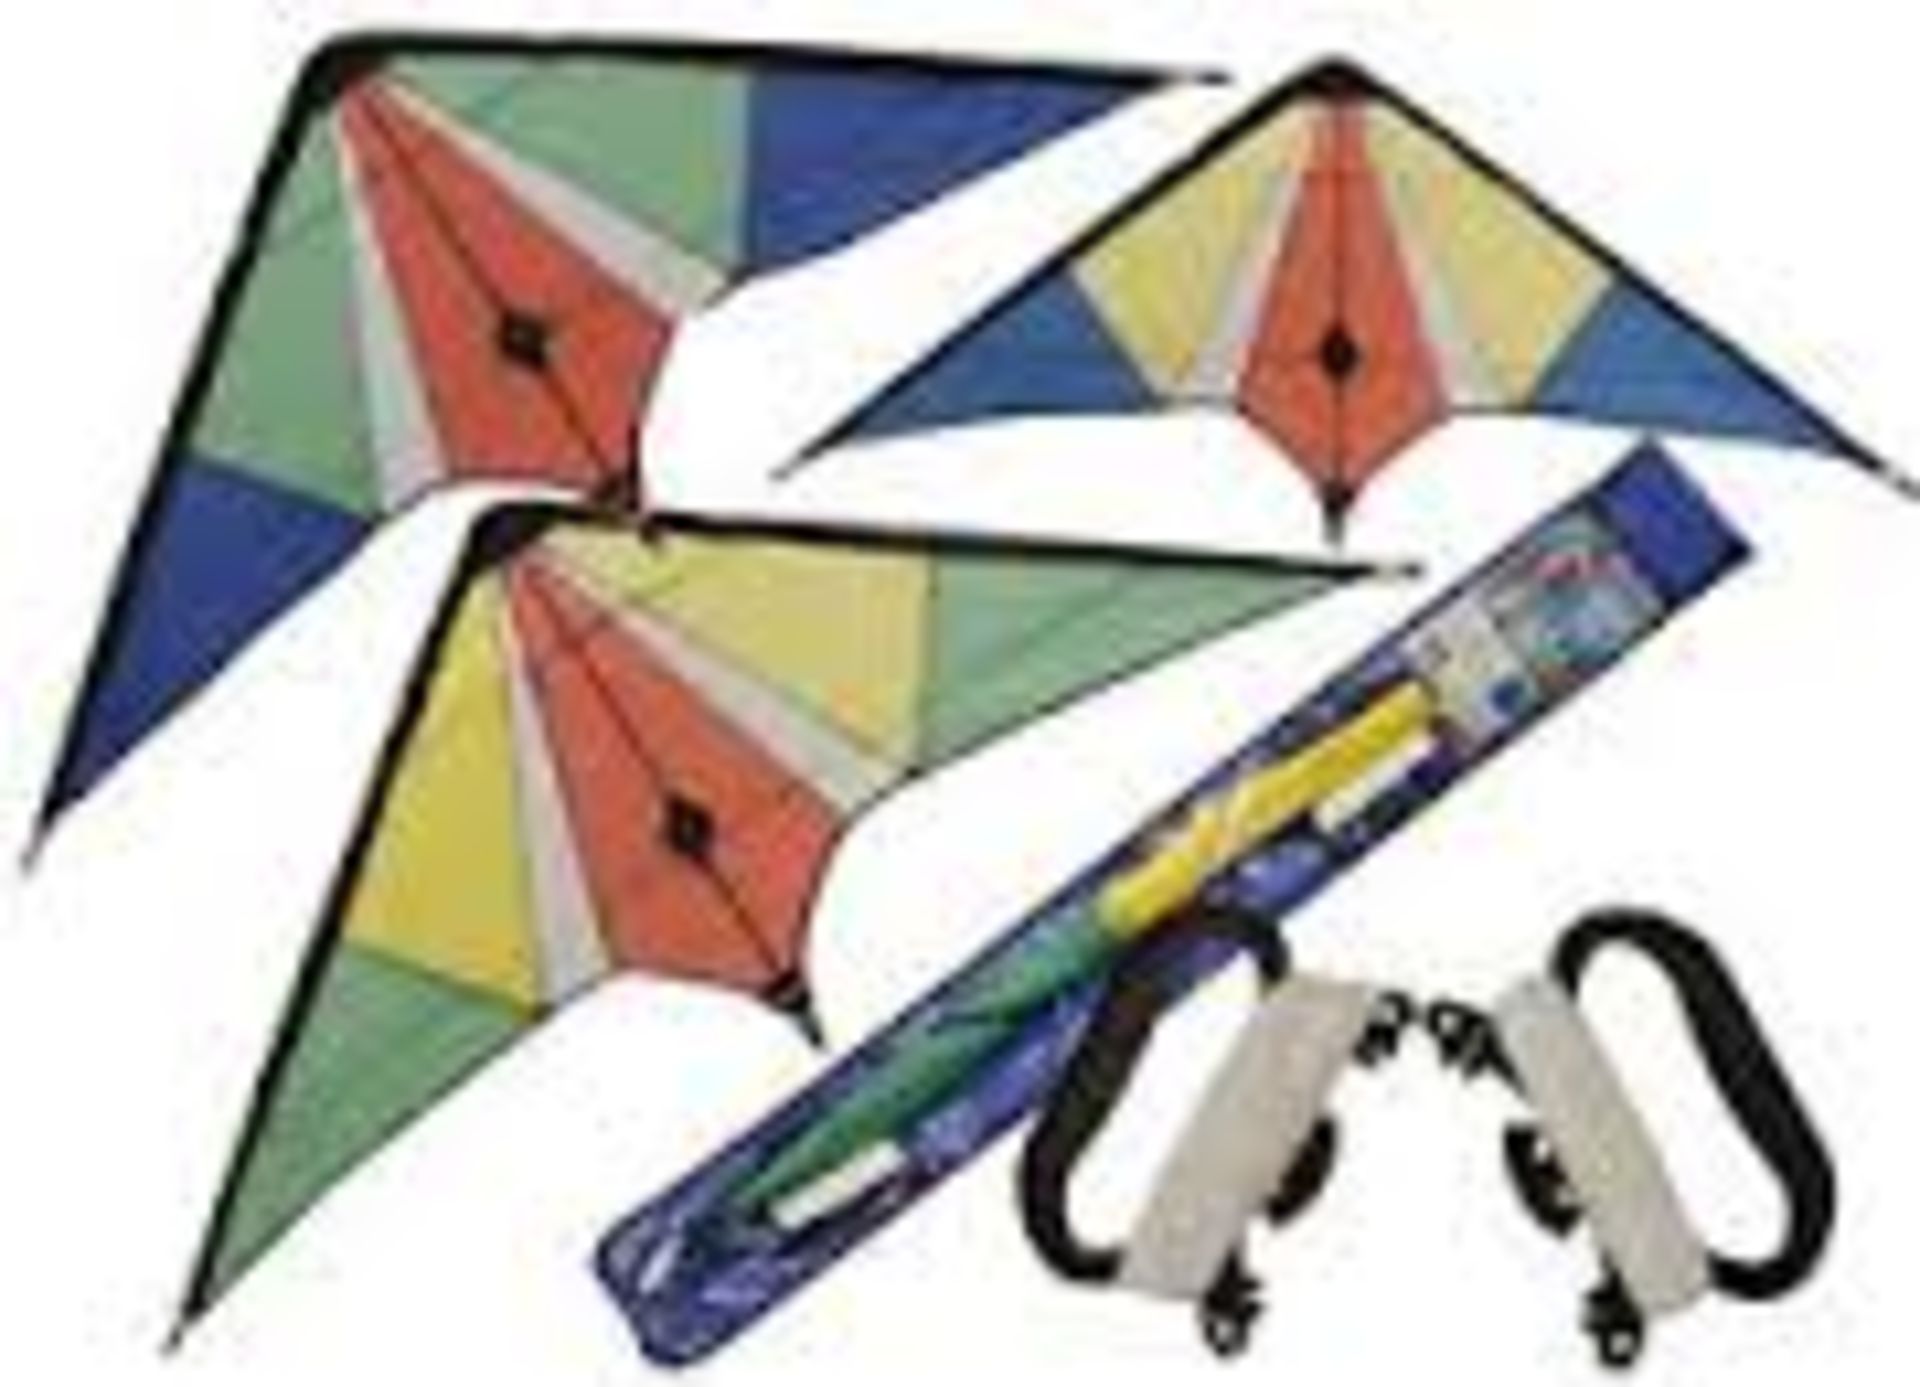 V *TRADE QTY* Brand New Nylon Colourful Delta Kite X 3 YOUR BID PRICE TO BE MULTIPLIED BY THREE